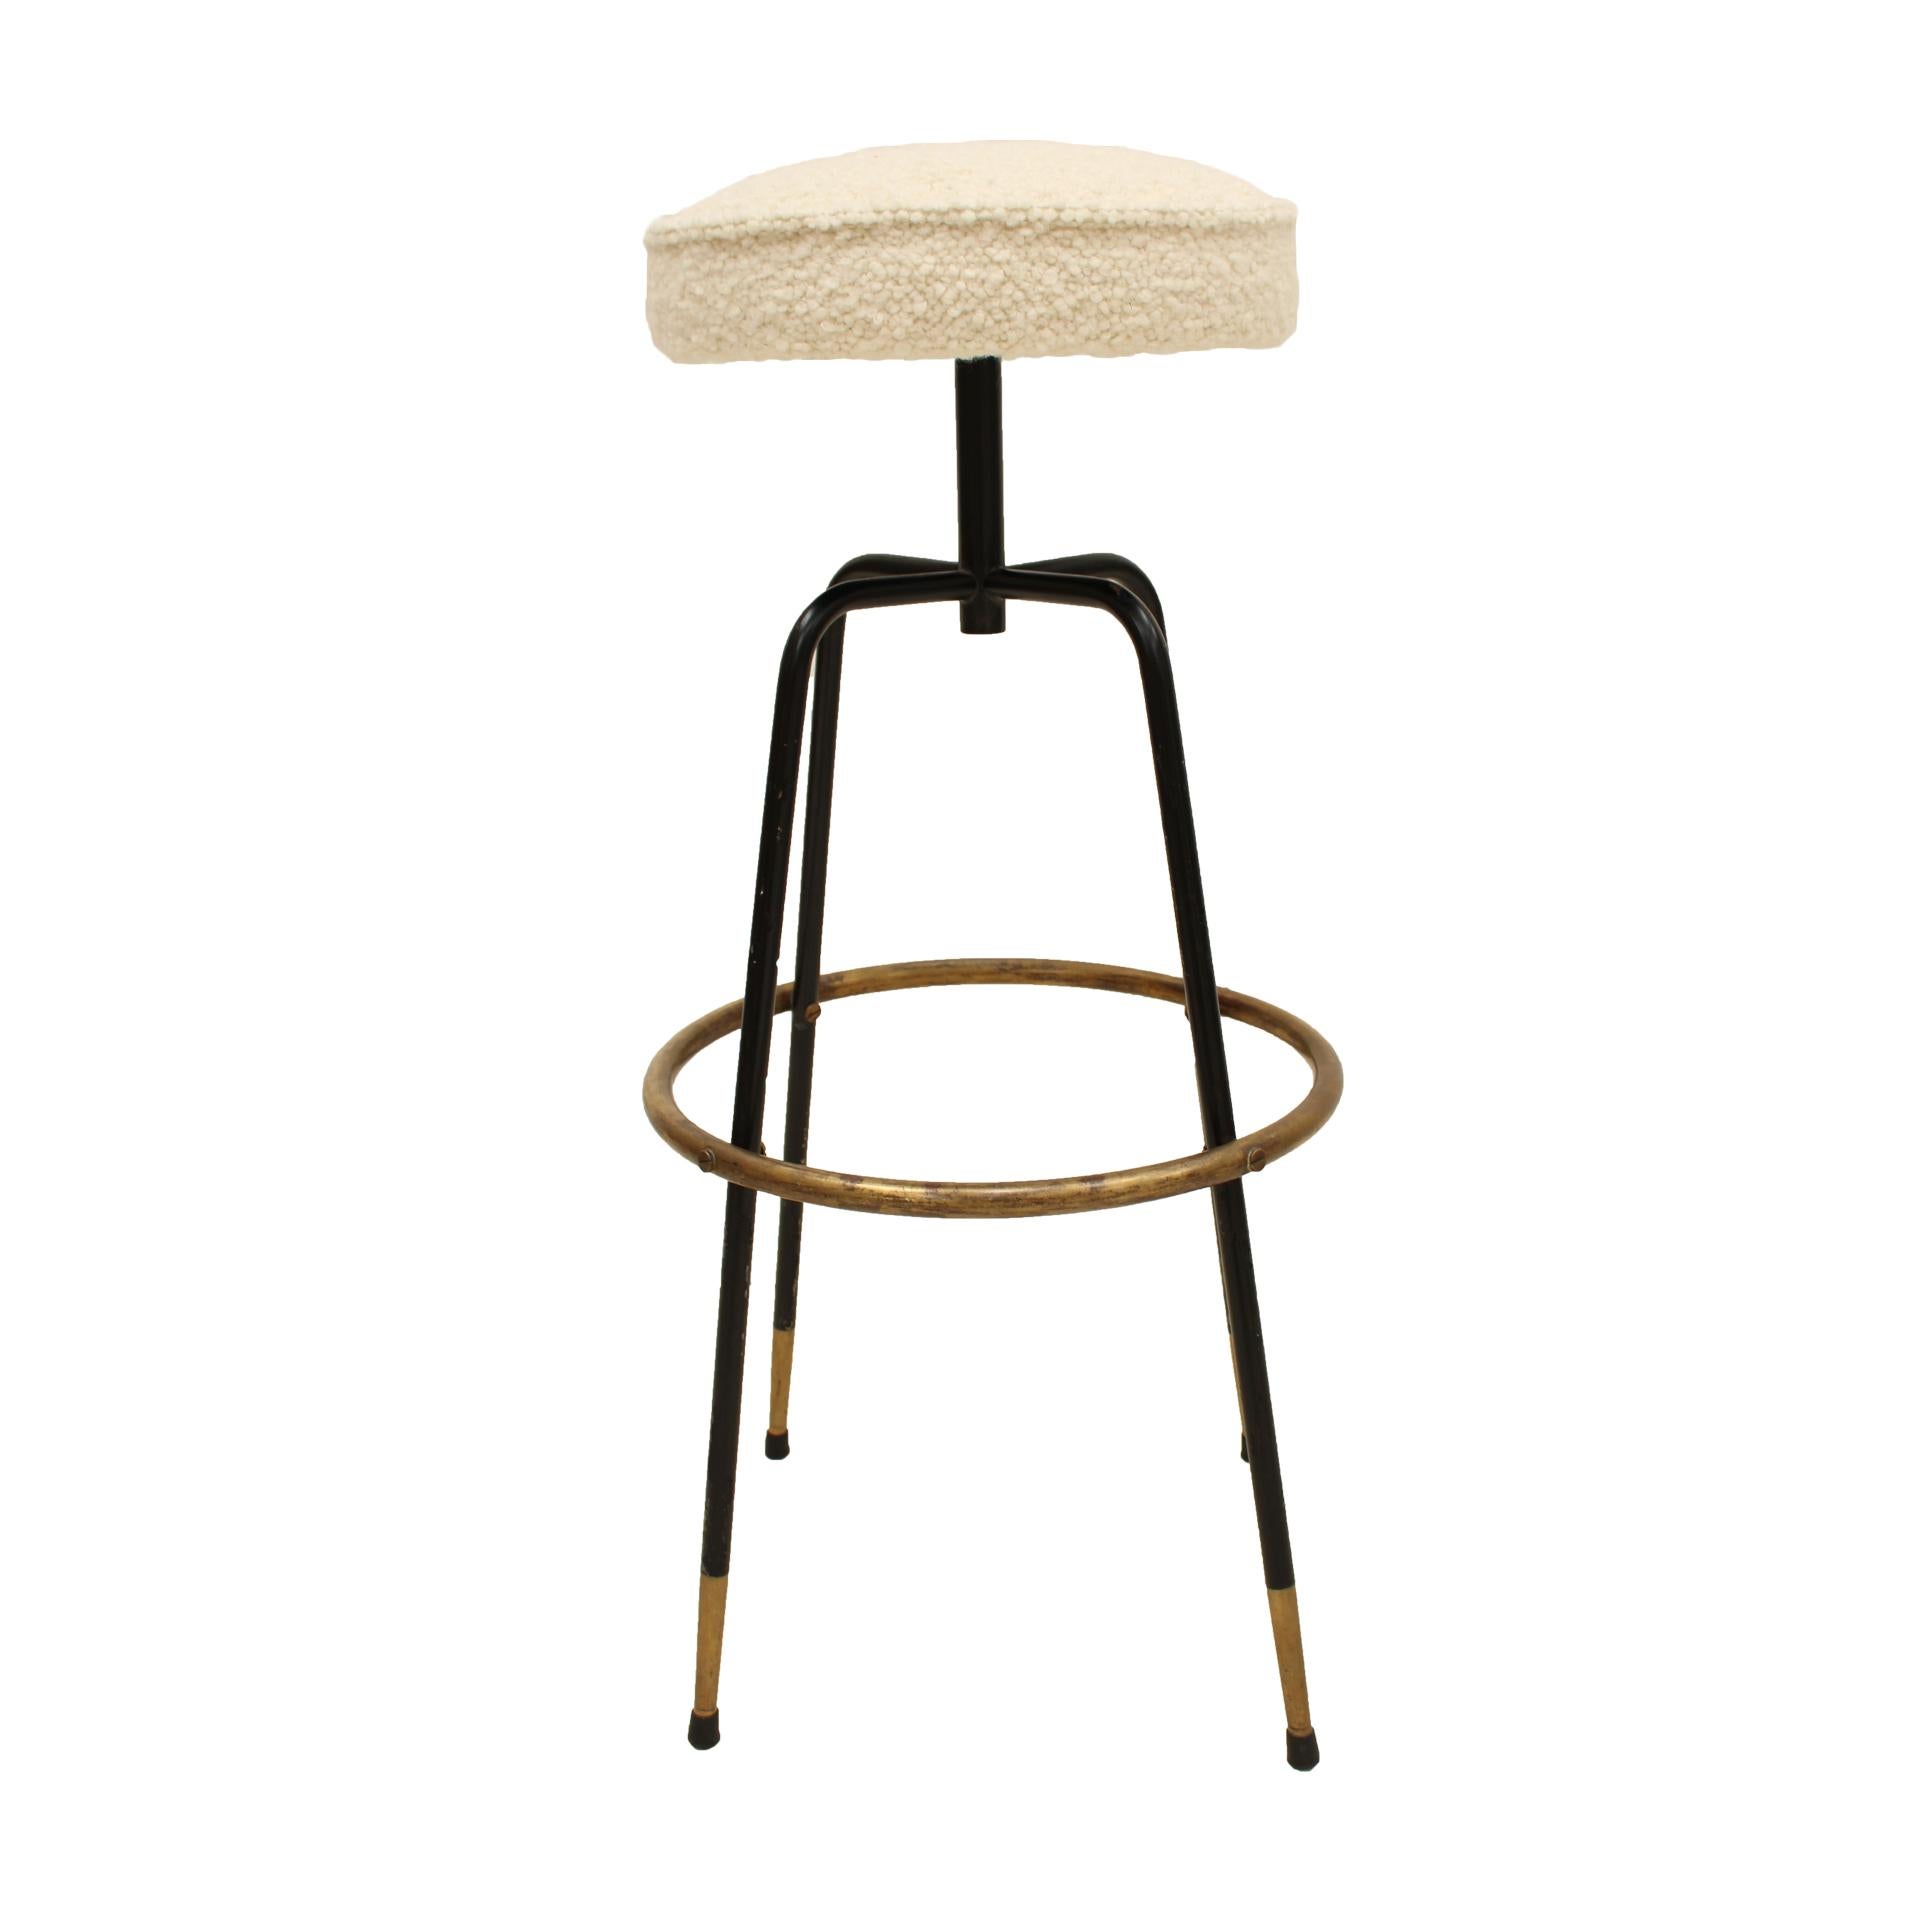 Pair of Italian stools from the 50's made with black lacquered metal structure and brass details. Upholstered in bouclé.